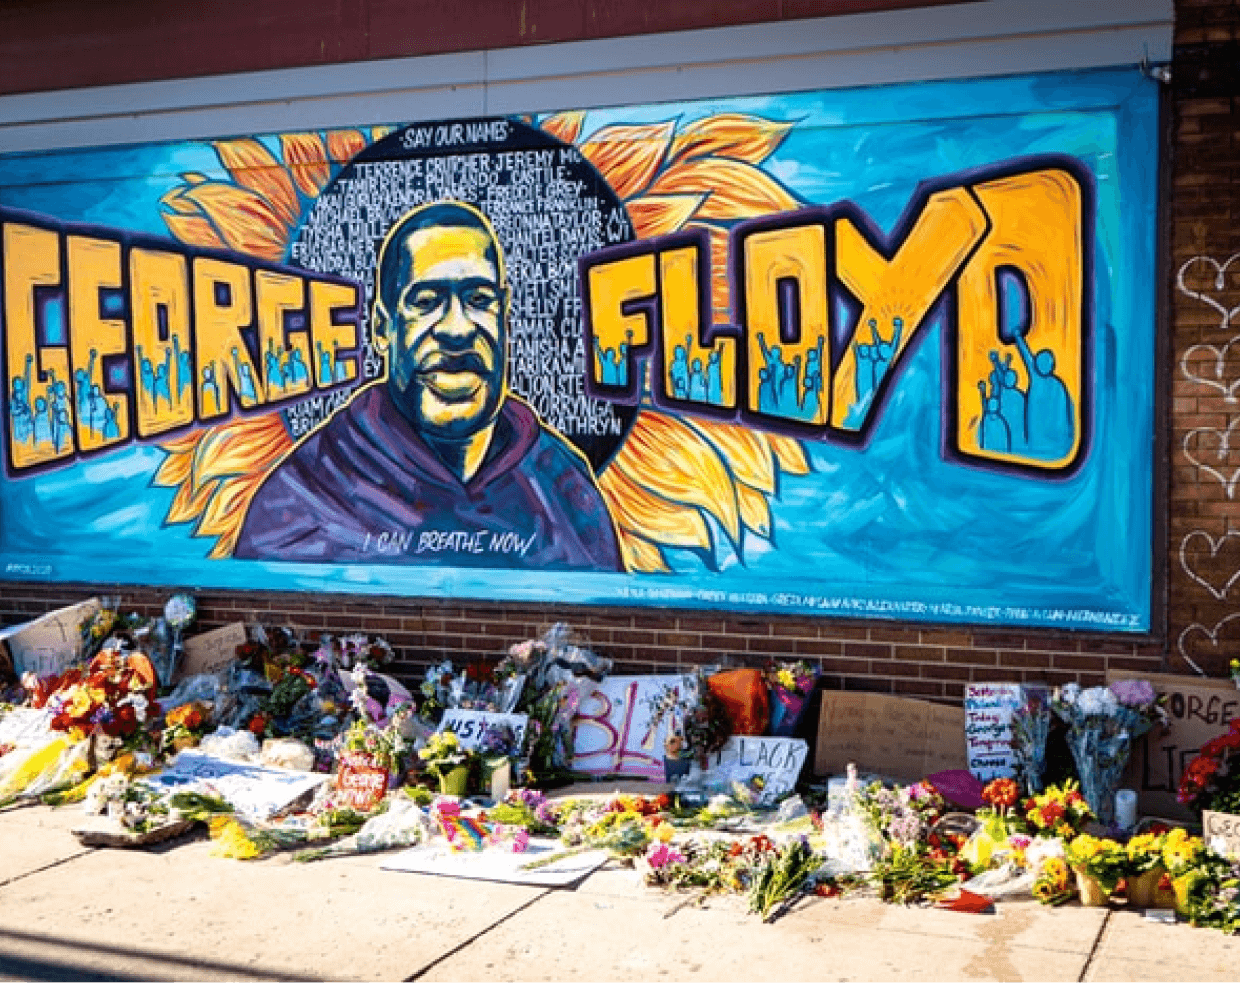 mural honoring the memory of george floyd with flowers and signs on the sidewalk underneath the mural